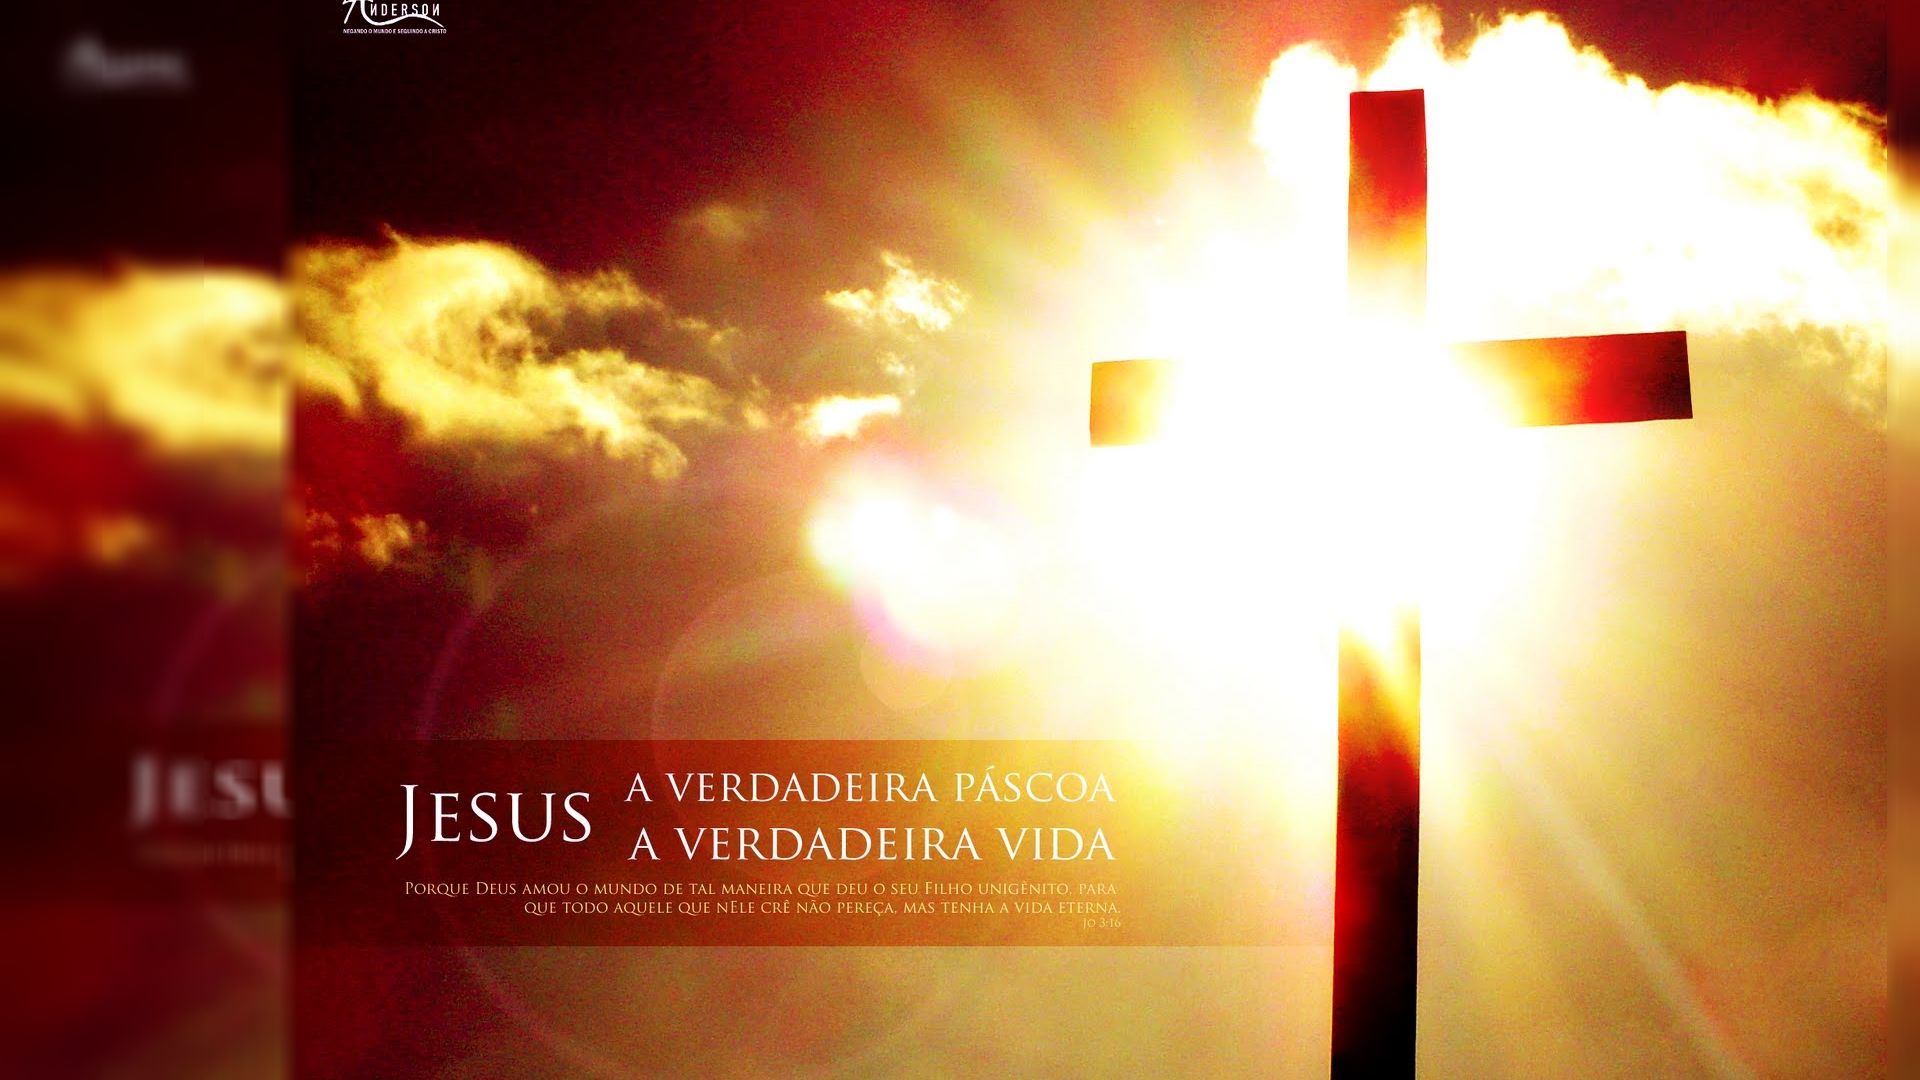 Jesus pictures A45 - Wallpaper